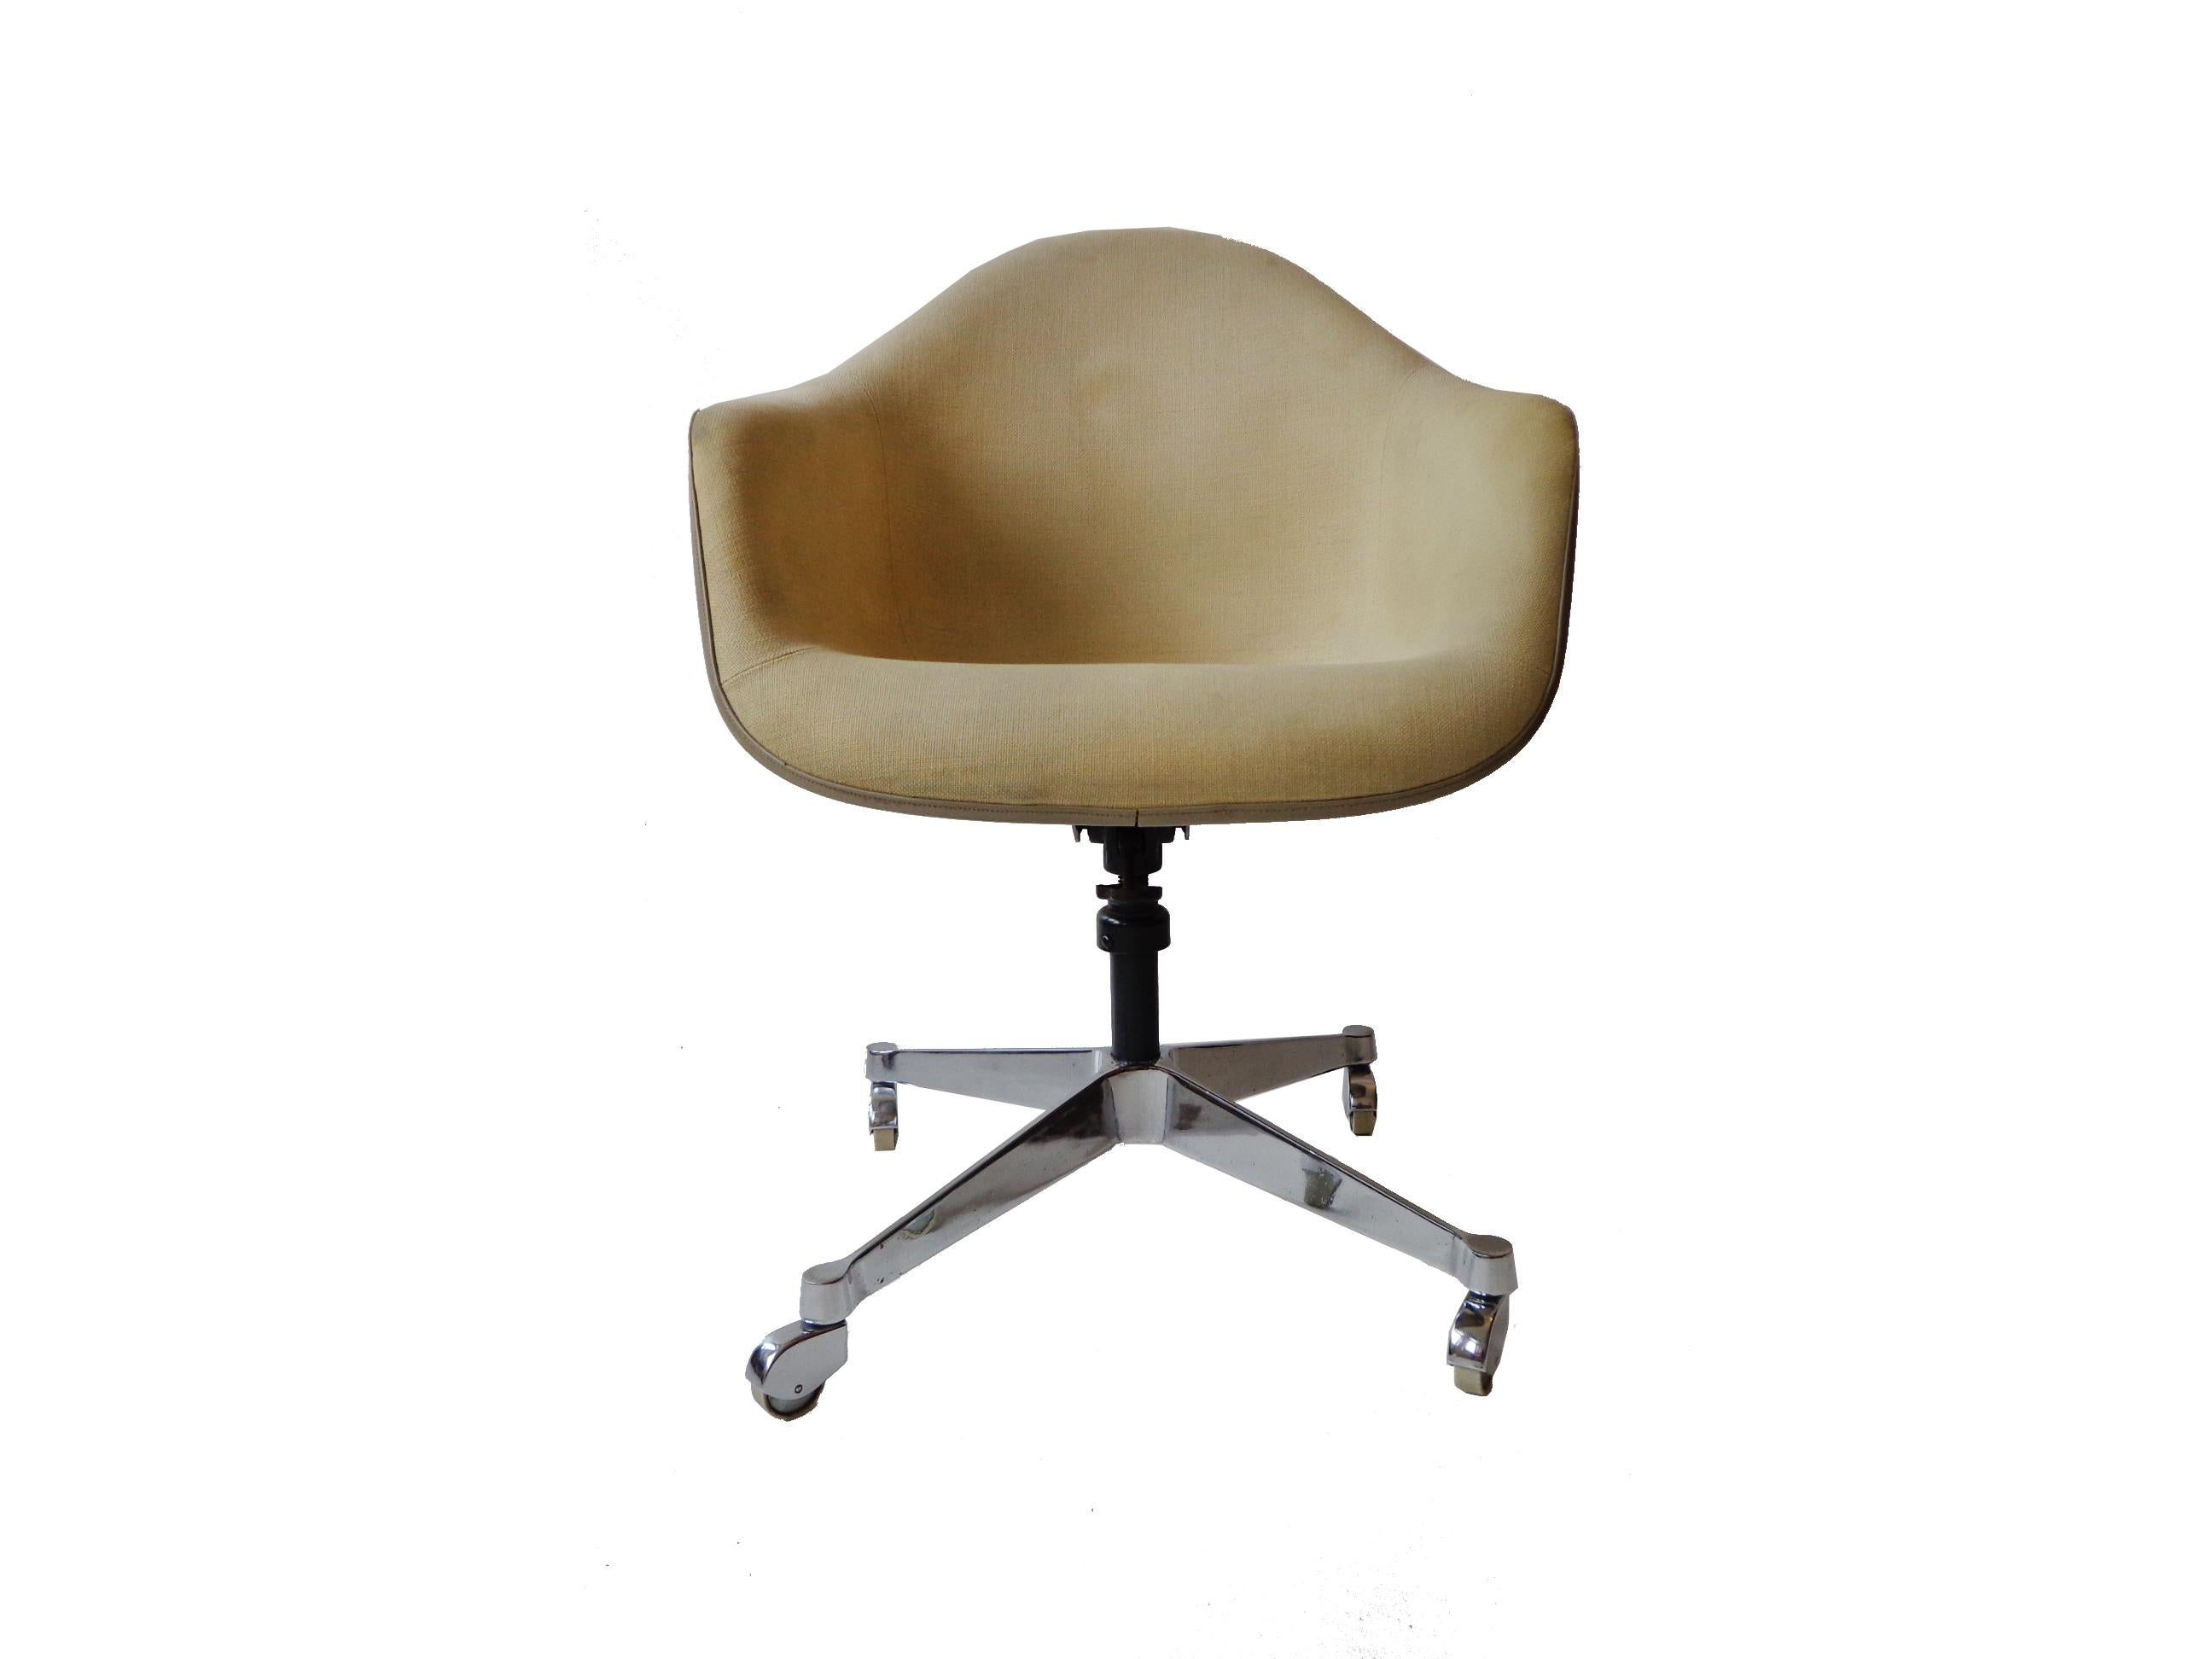 Classic Mid-Century Modern office or desk armchair on castors and tilt swivel in of-white fabric with molded fiberglass shell on a chrome base.
Tilt swivel and adjustable base works great.
Adjustable seat height from: 18.90